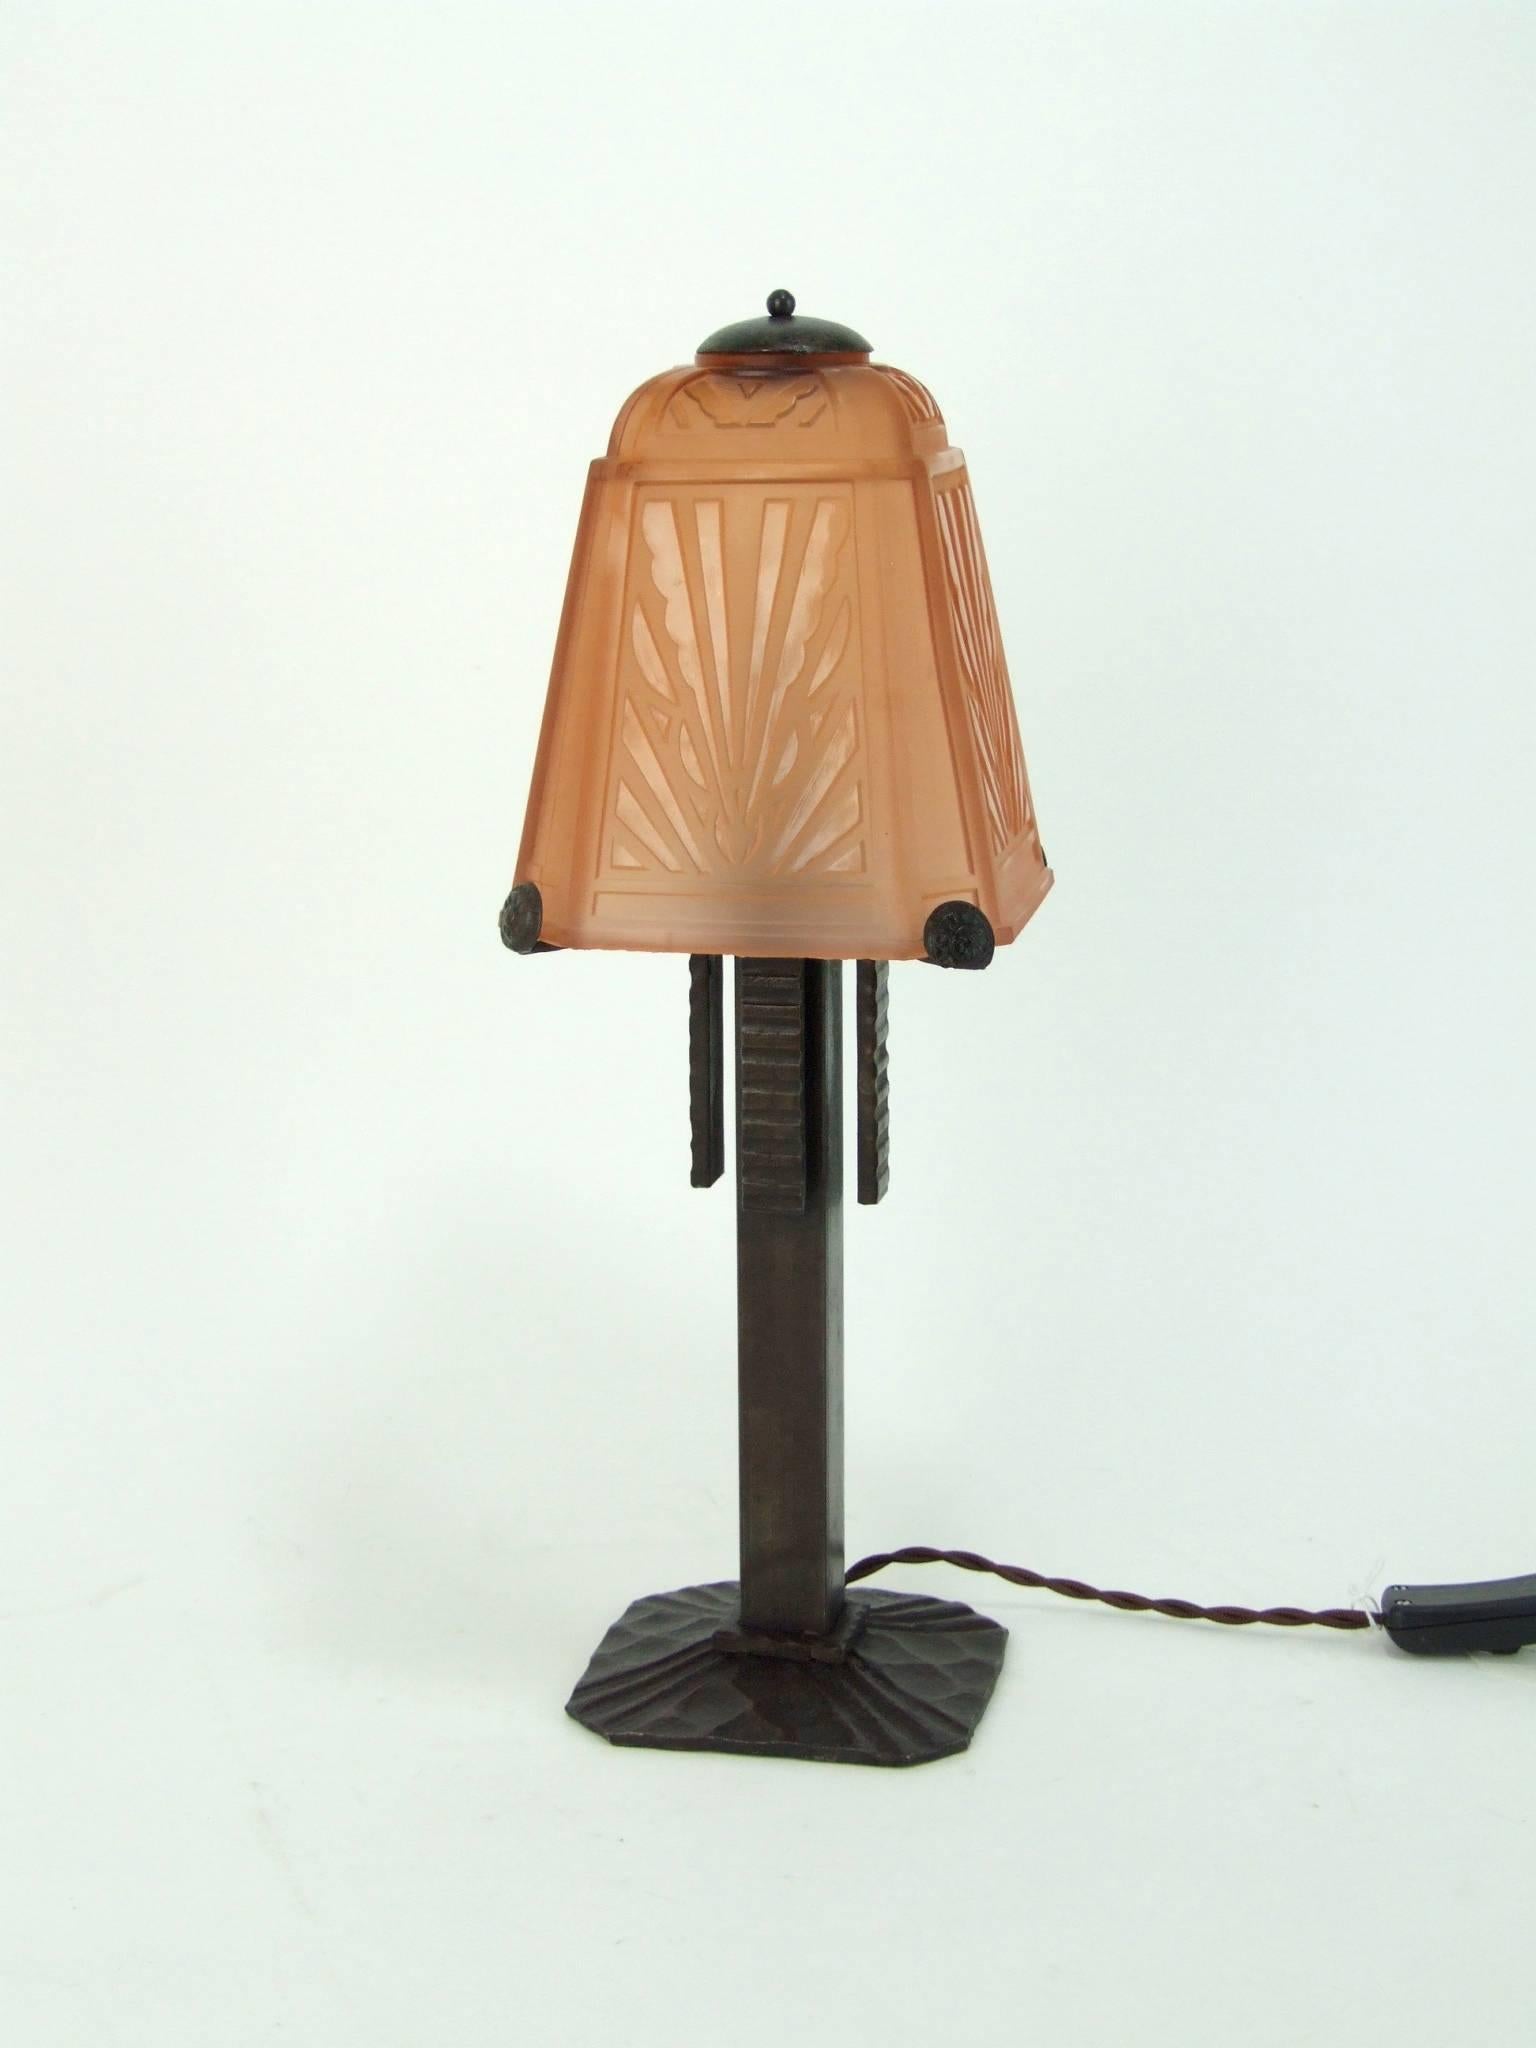 Early 20th Century French Art Deco Table Lamp by Muller Freres For Sale